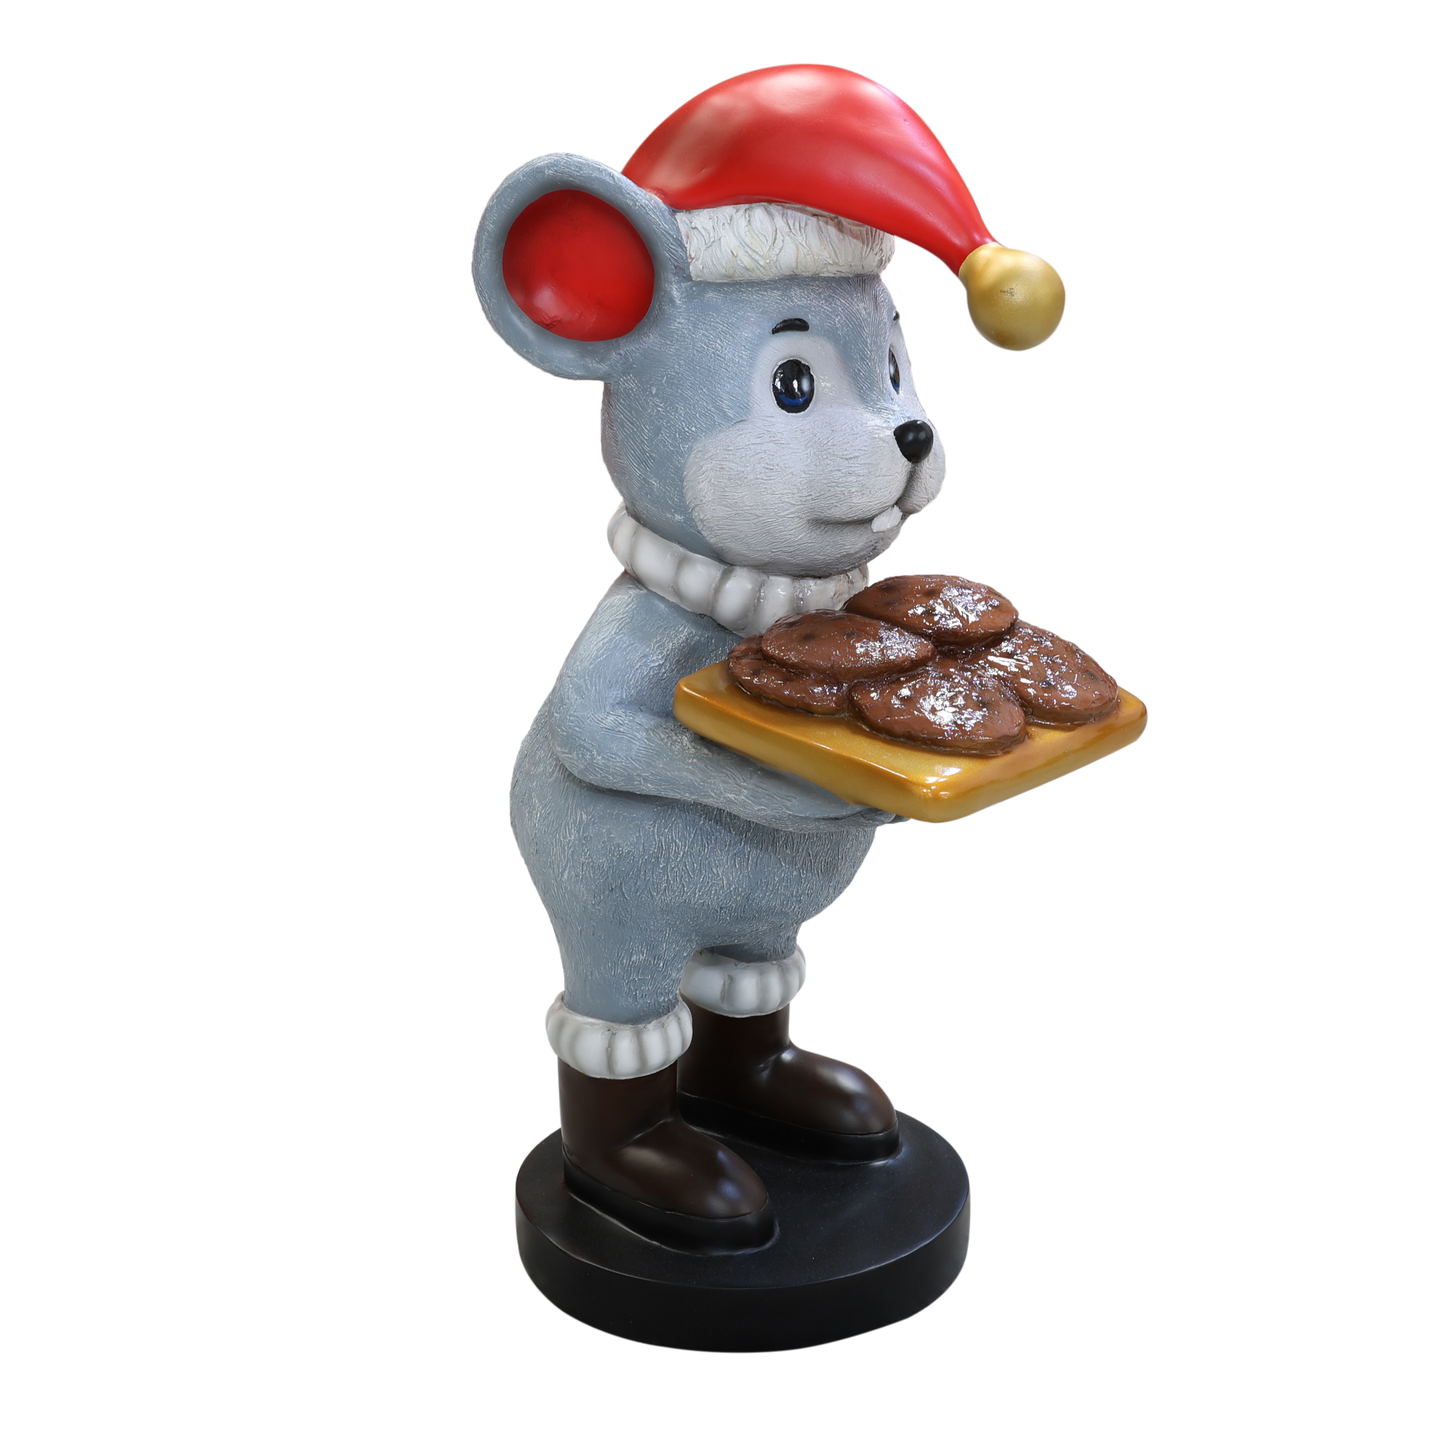 3ft Fiberglass Resin Mouse Wearing Boots Statue